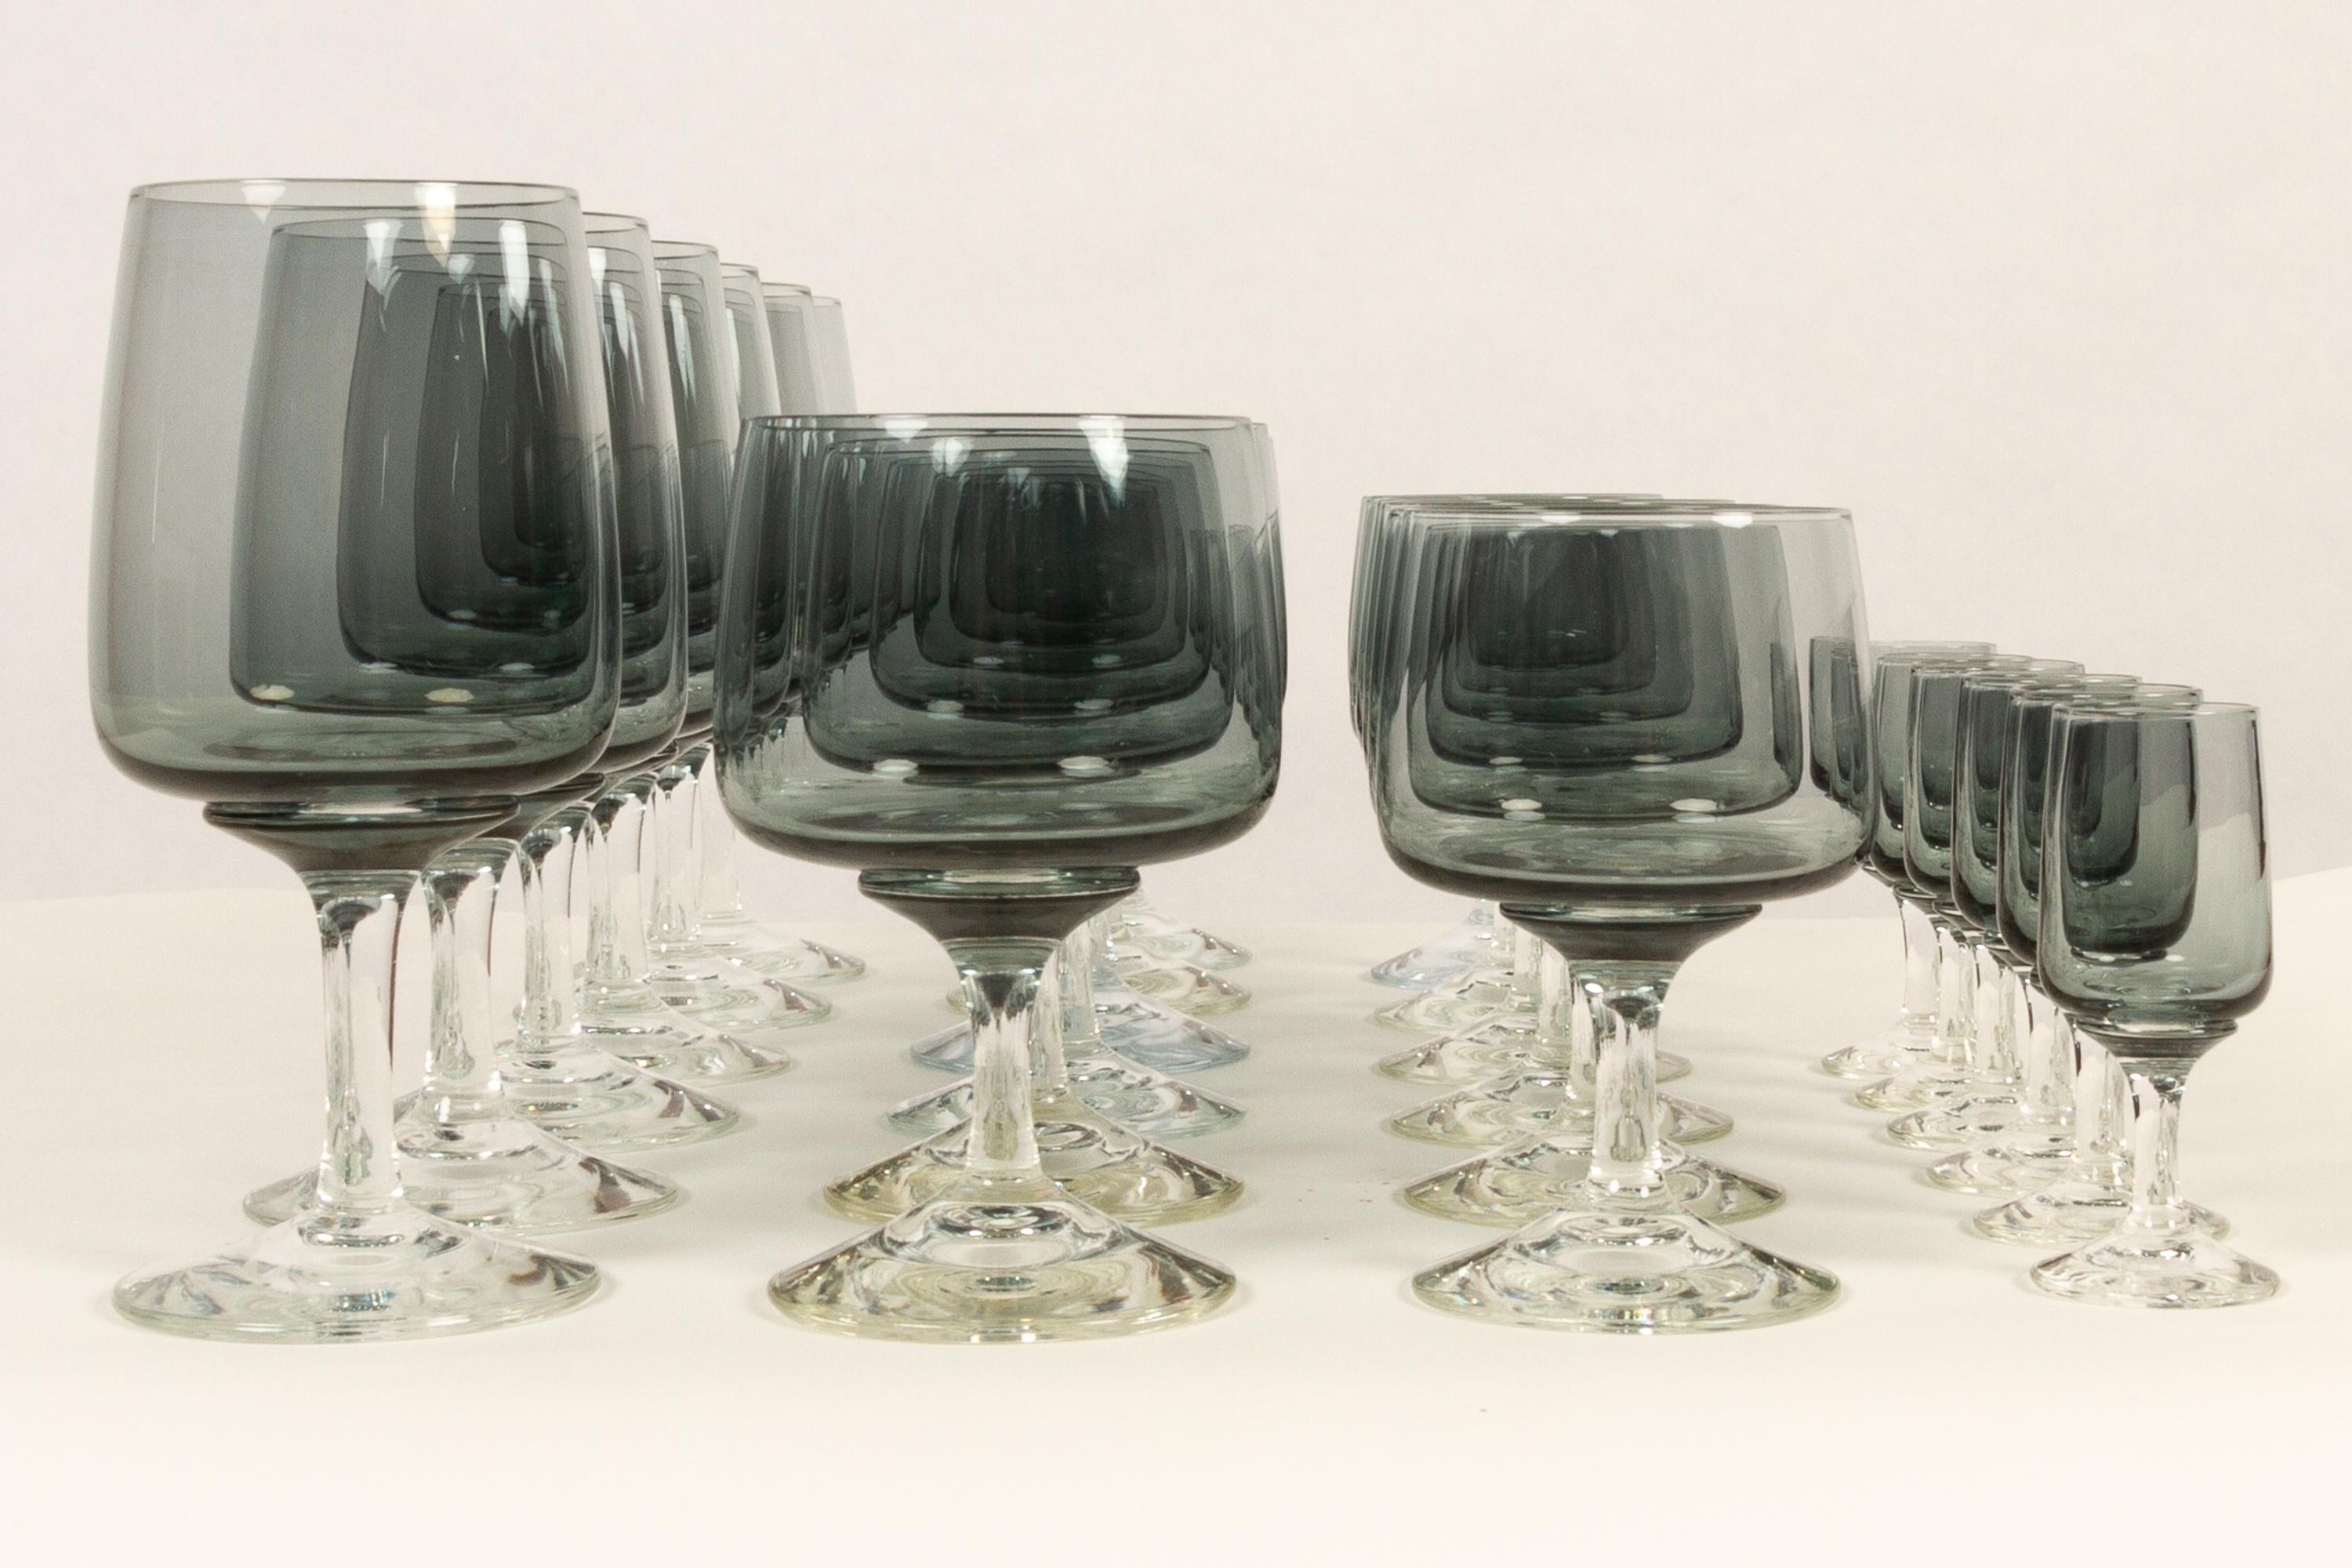 Holmegaard Atlantic drinking glasses 1960s set of 24.
Set of 24 beautiful mouth-blown vintage drinking glasses from Danish glasswork Holmegaard designed by Per Lütken in 1962. The top of the glasses are tinted in a bluish grey, base in clear glass.